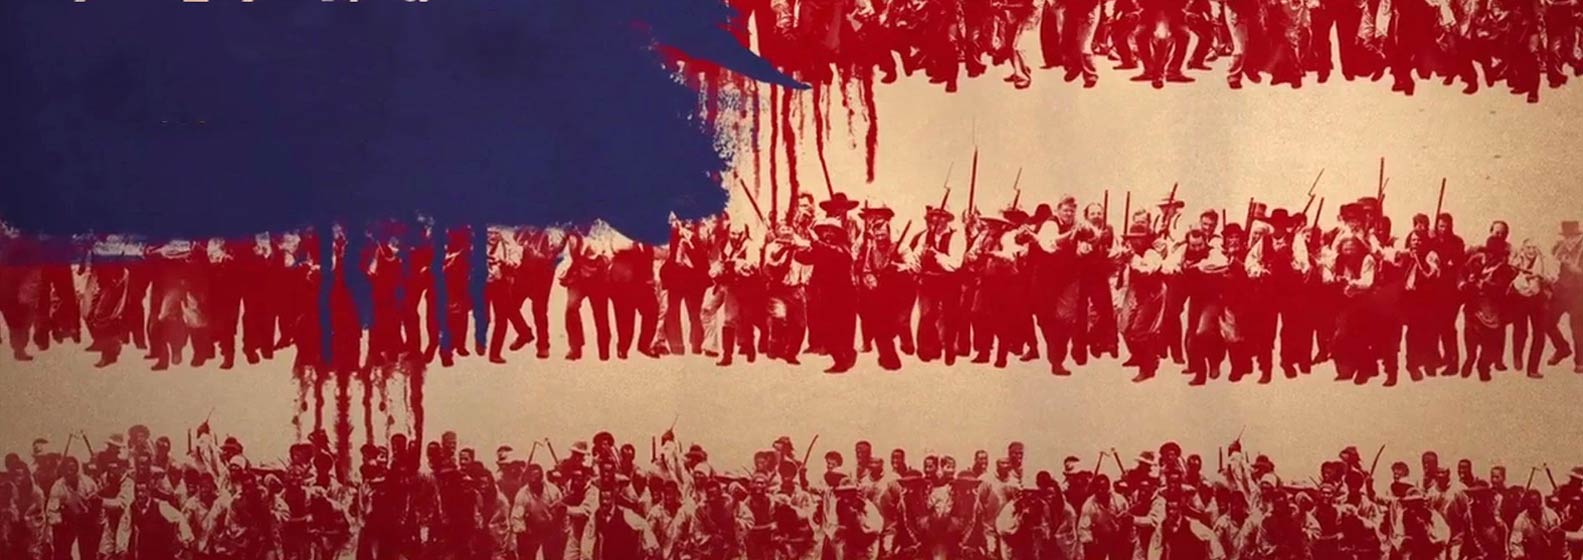 The Birth of a Nation - Header Image